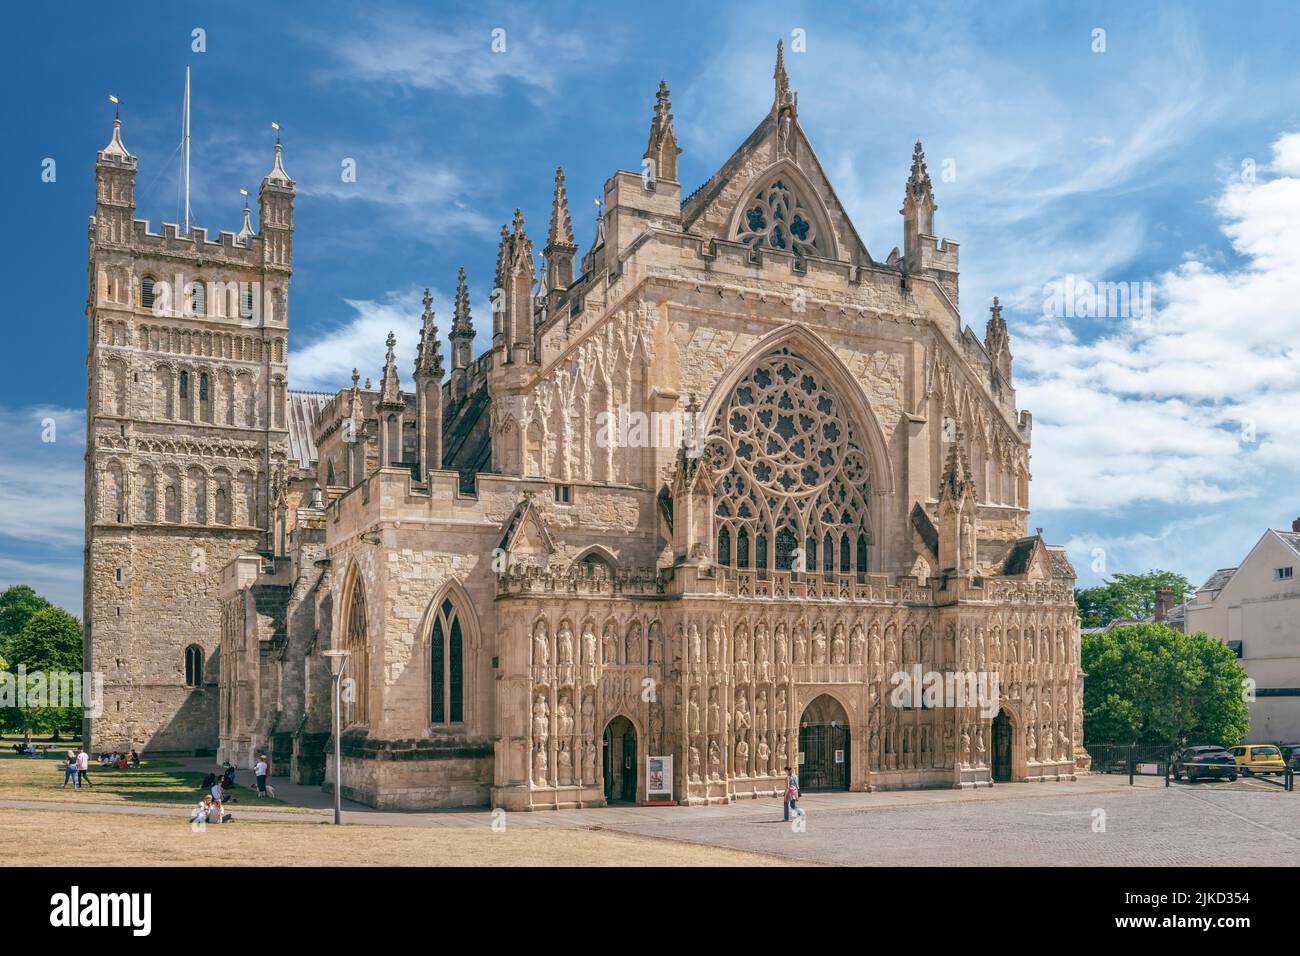 The Cathedral Church of Saint Peter in Exeter is an Anglican cathedral in Exeter, Devon. Completed around 1400, it has the longest uninterrupted medie Stock Photo